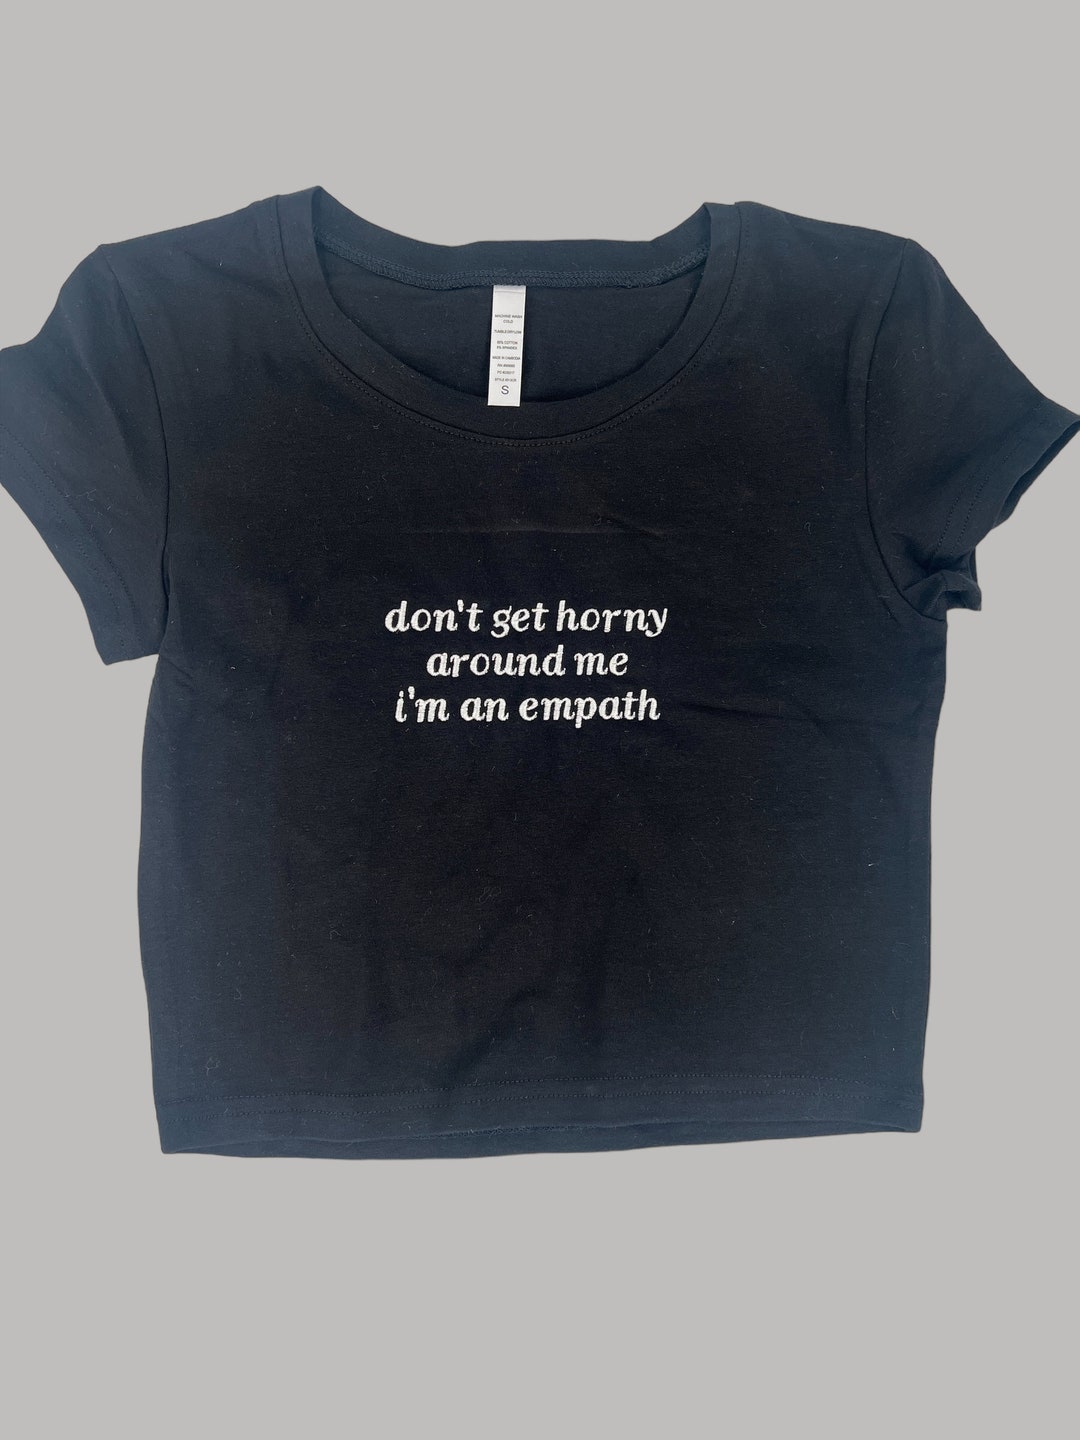 Dont Get Horny Around Me, I'm an Empath Crop Top - Etsy